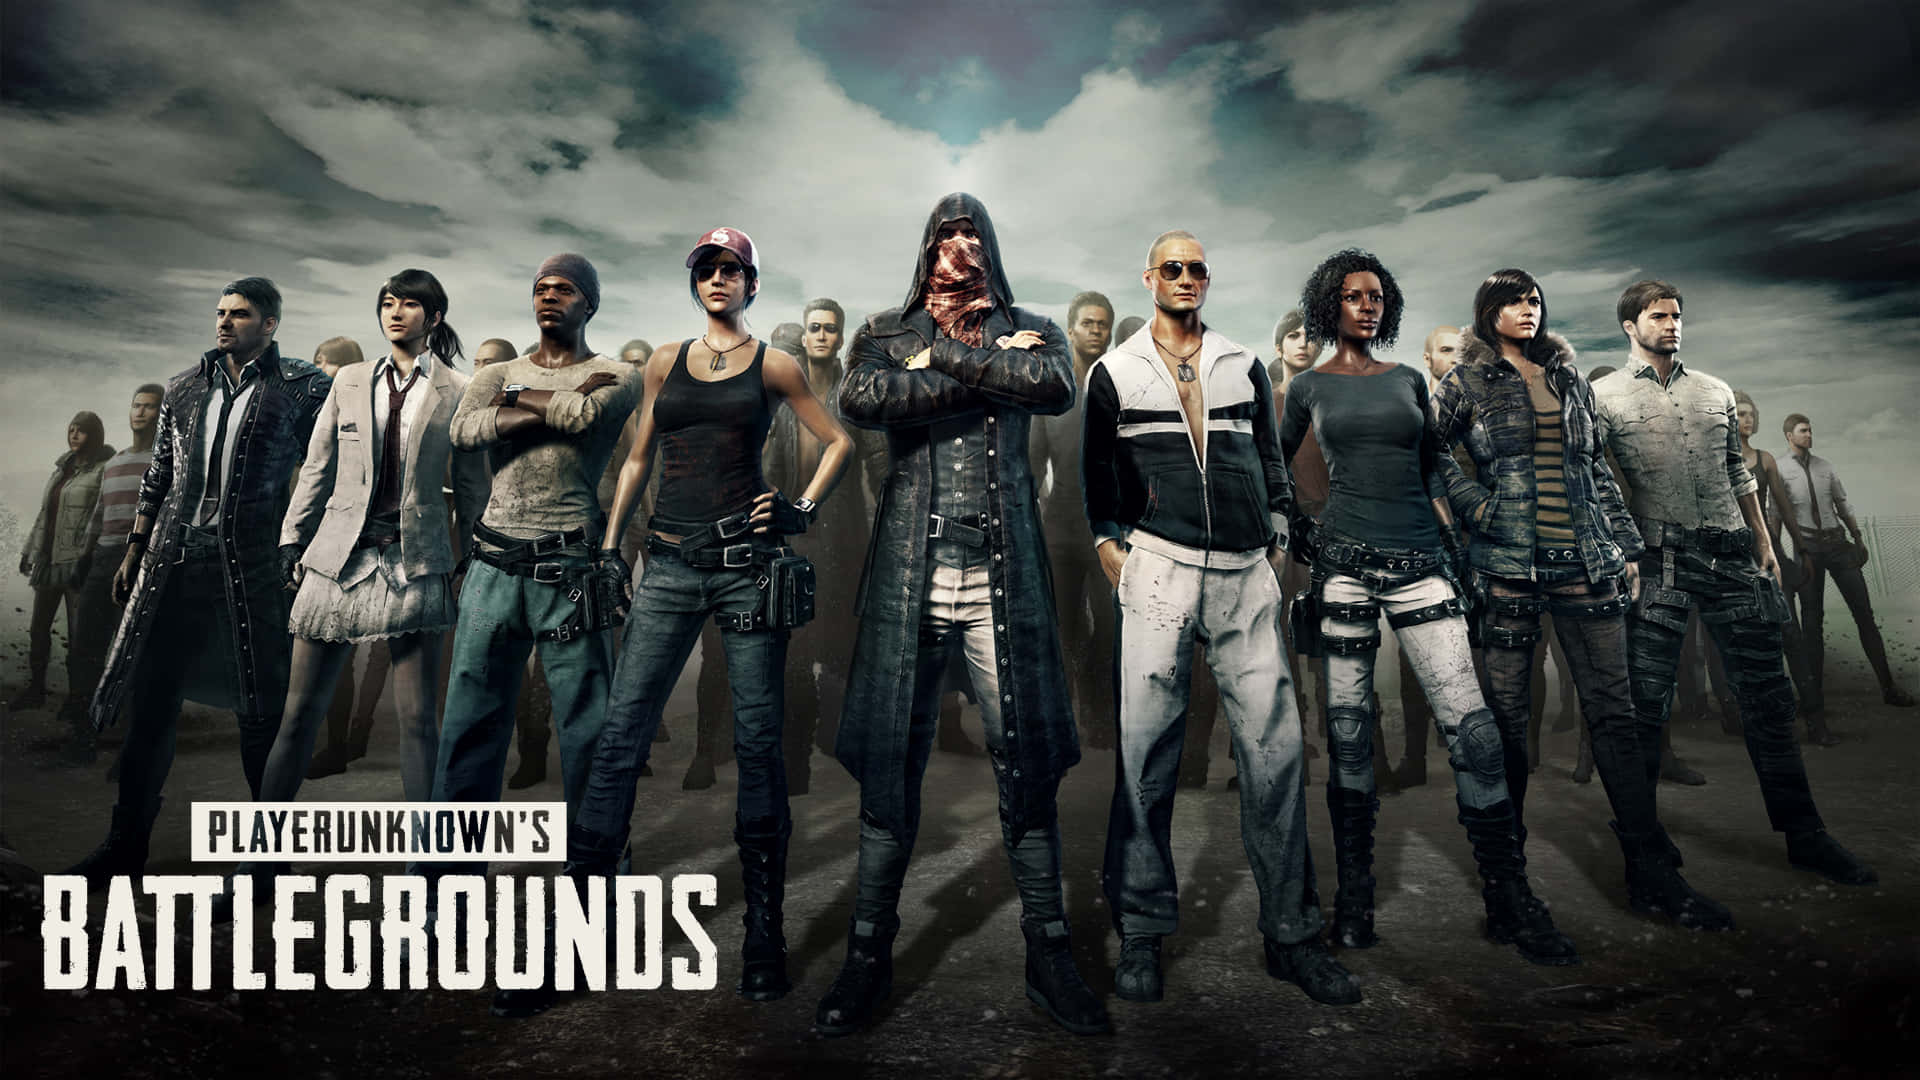 Ready your team and join the ultimate battle in PlayerUnknown's Battlegrounds!